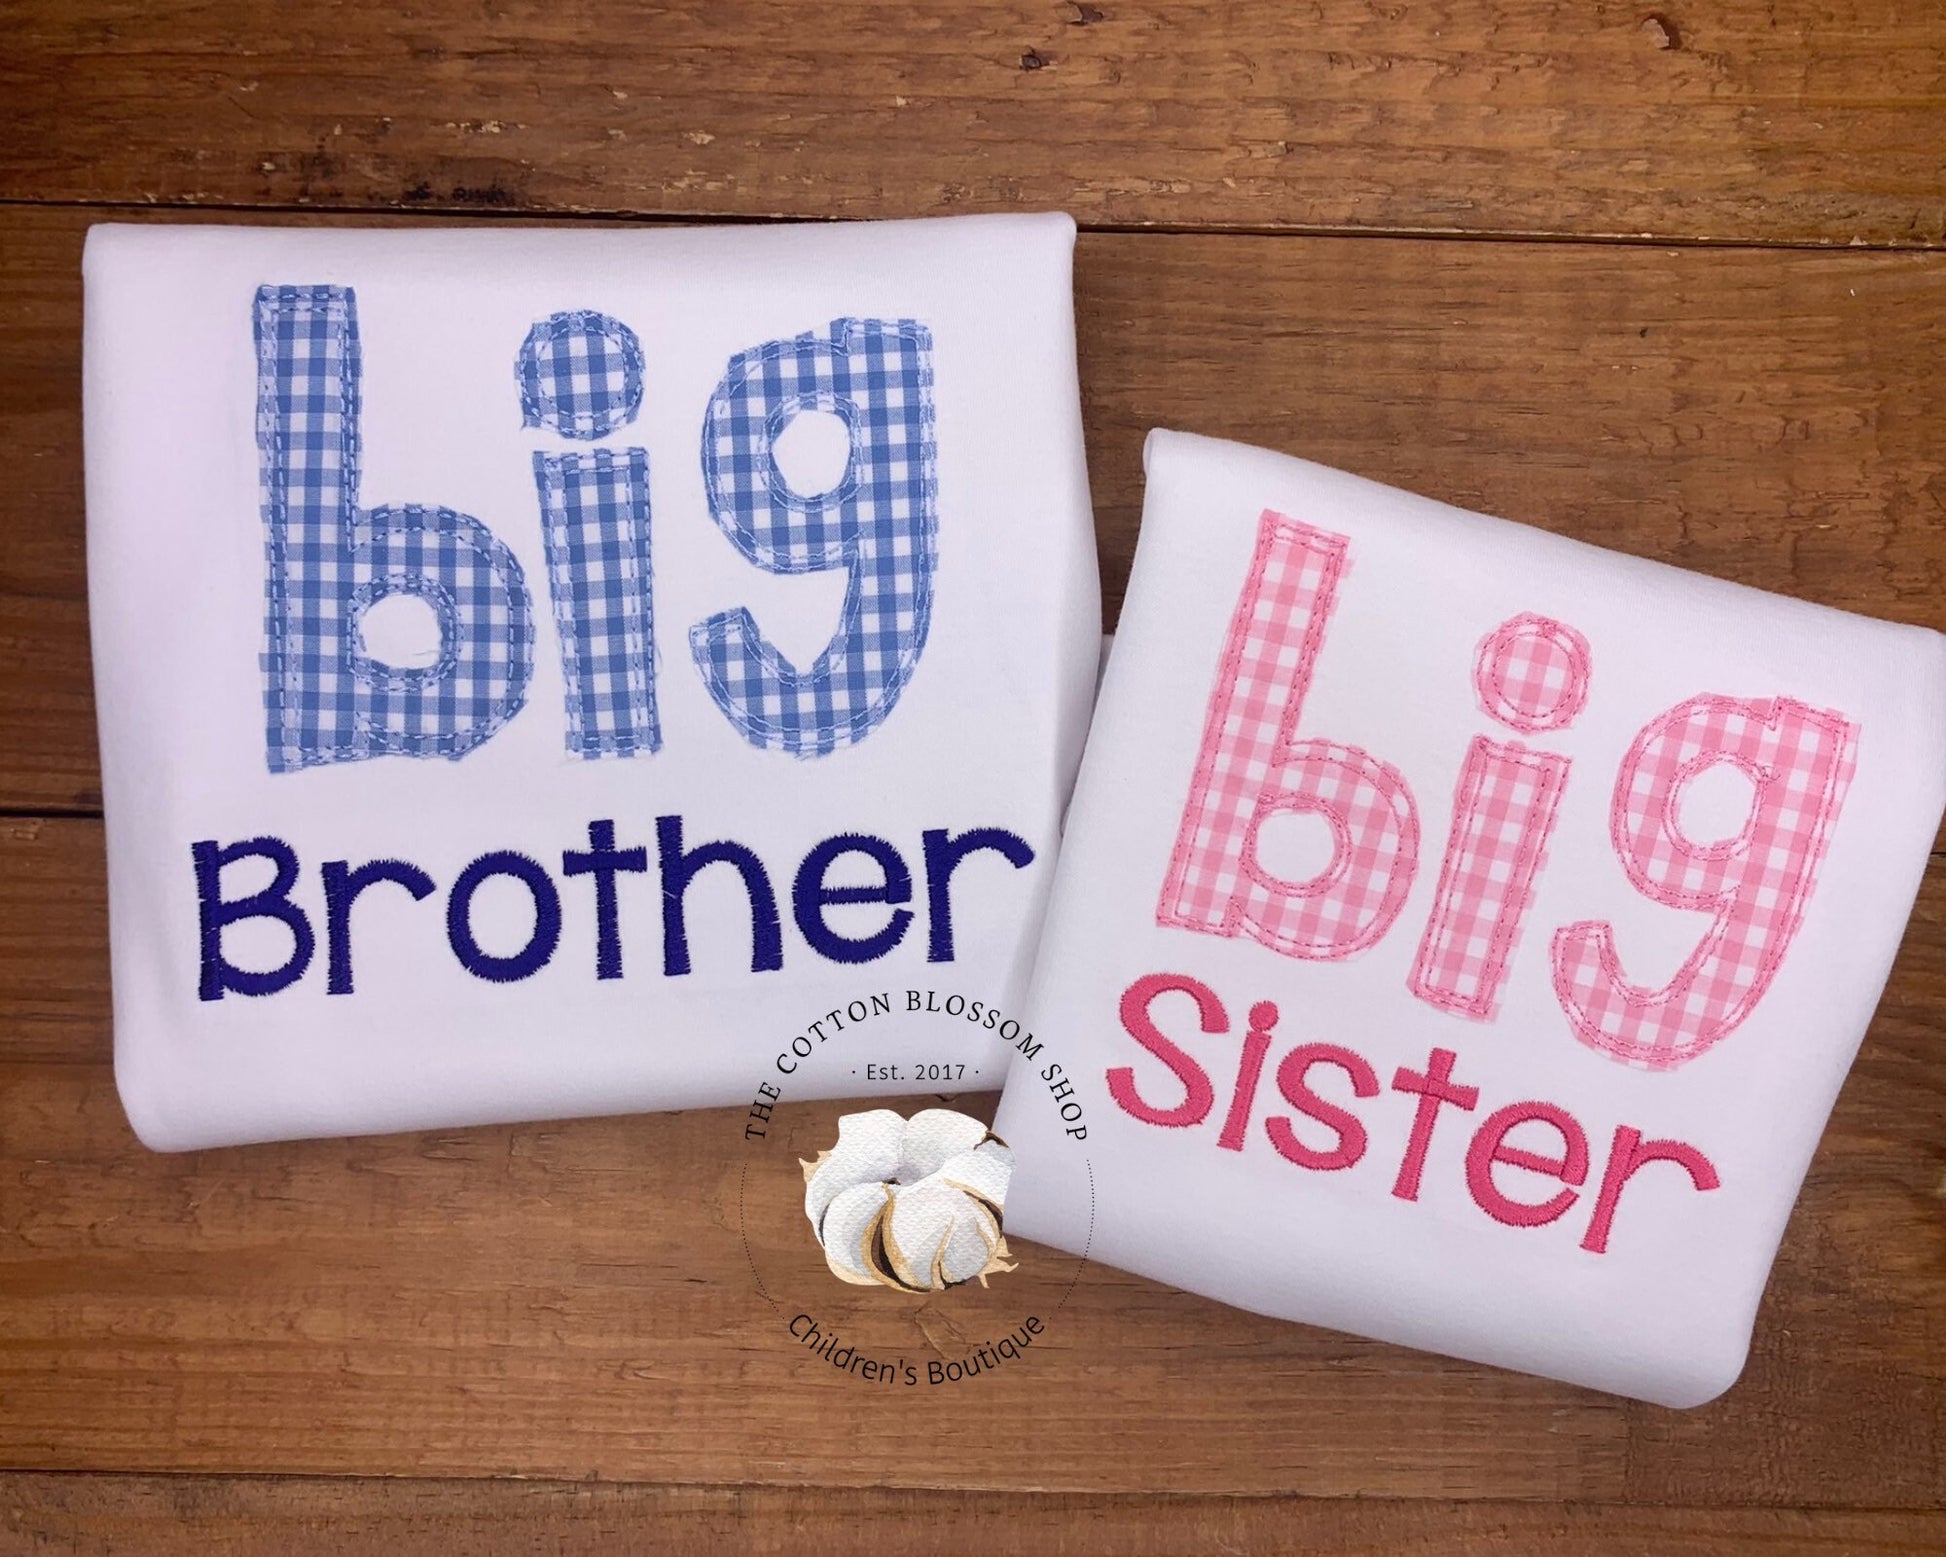 Brother and sister matching shirts, sibling shirts, big brother shirt, big sister shirt, embroidered, applique shirts, gingham